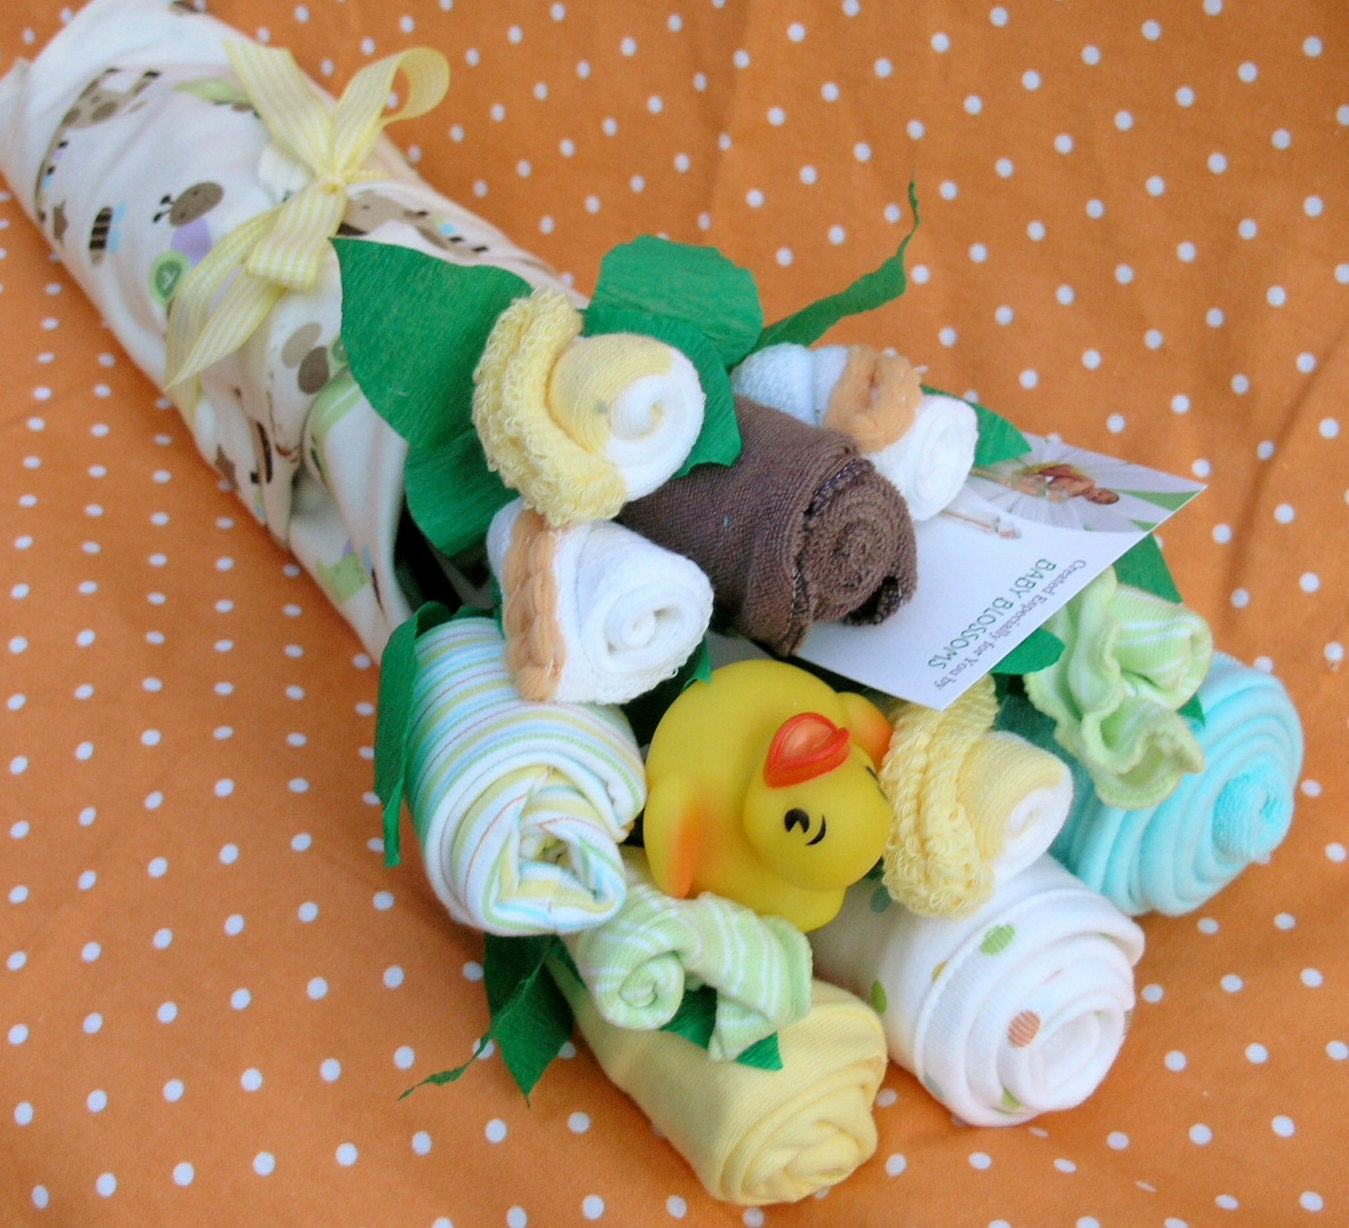 Gender Neutral Baby Gifts
 Gender Neutral Baby Shower Gift Bouquet by babyblossomco